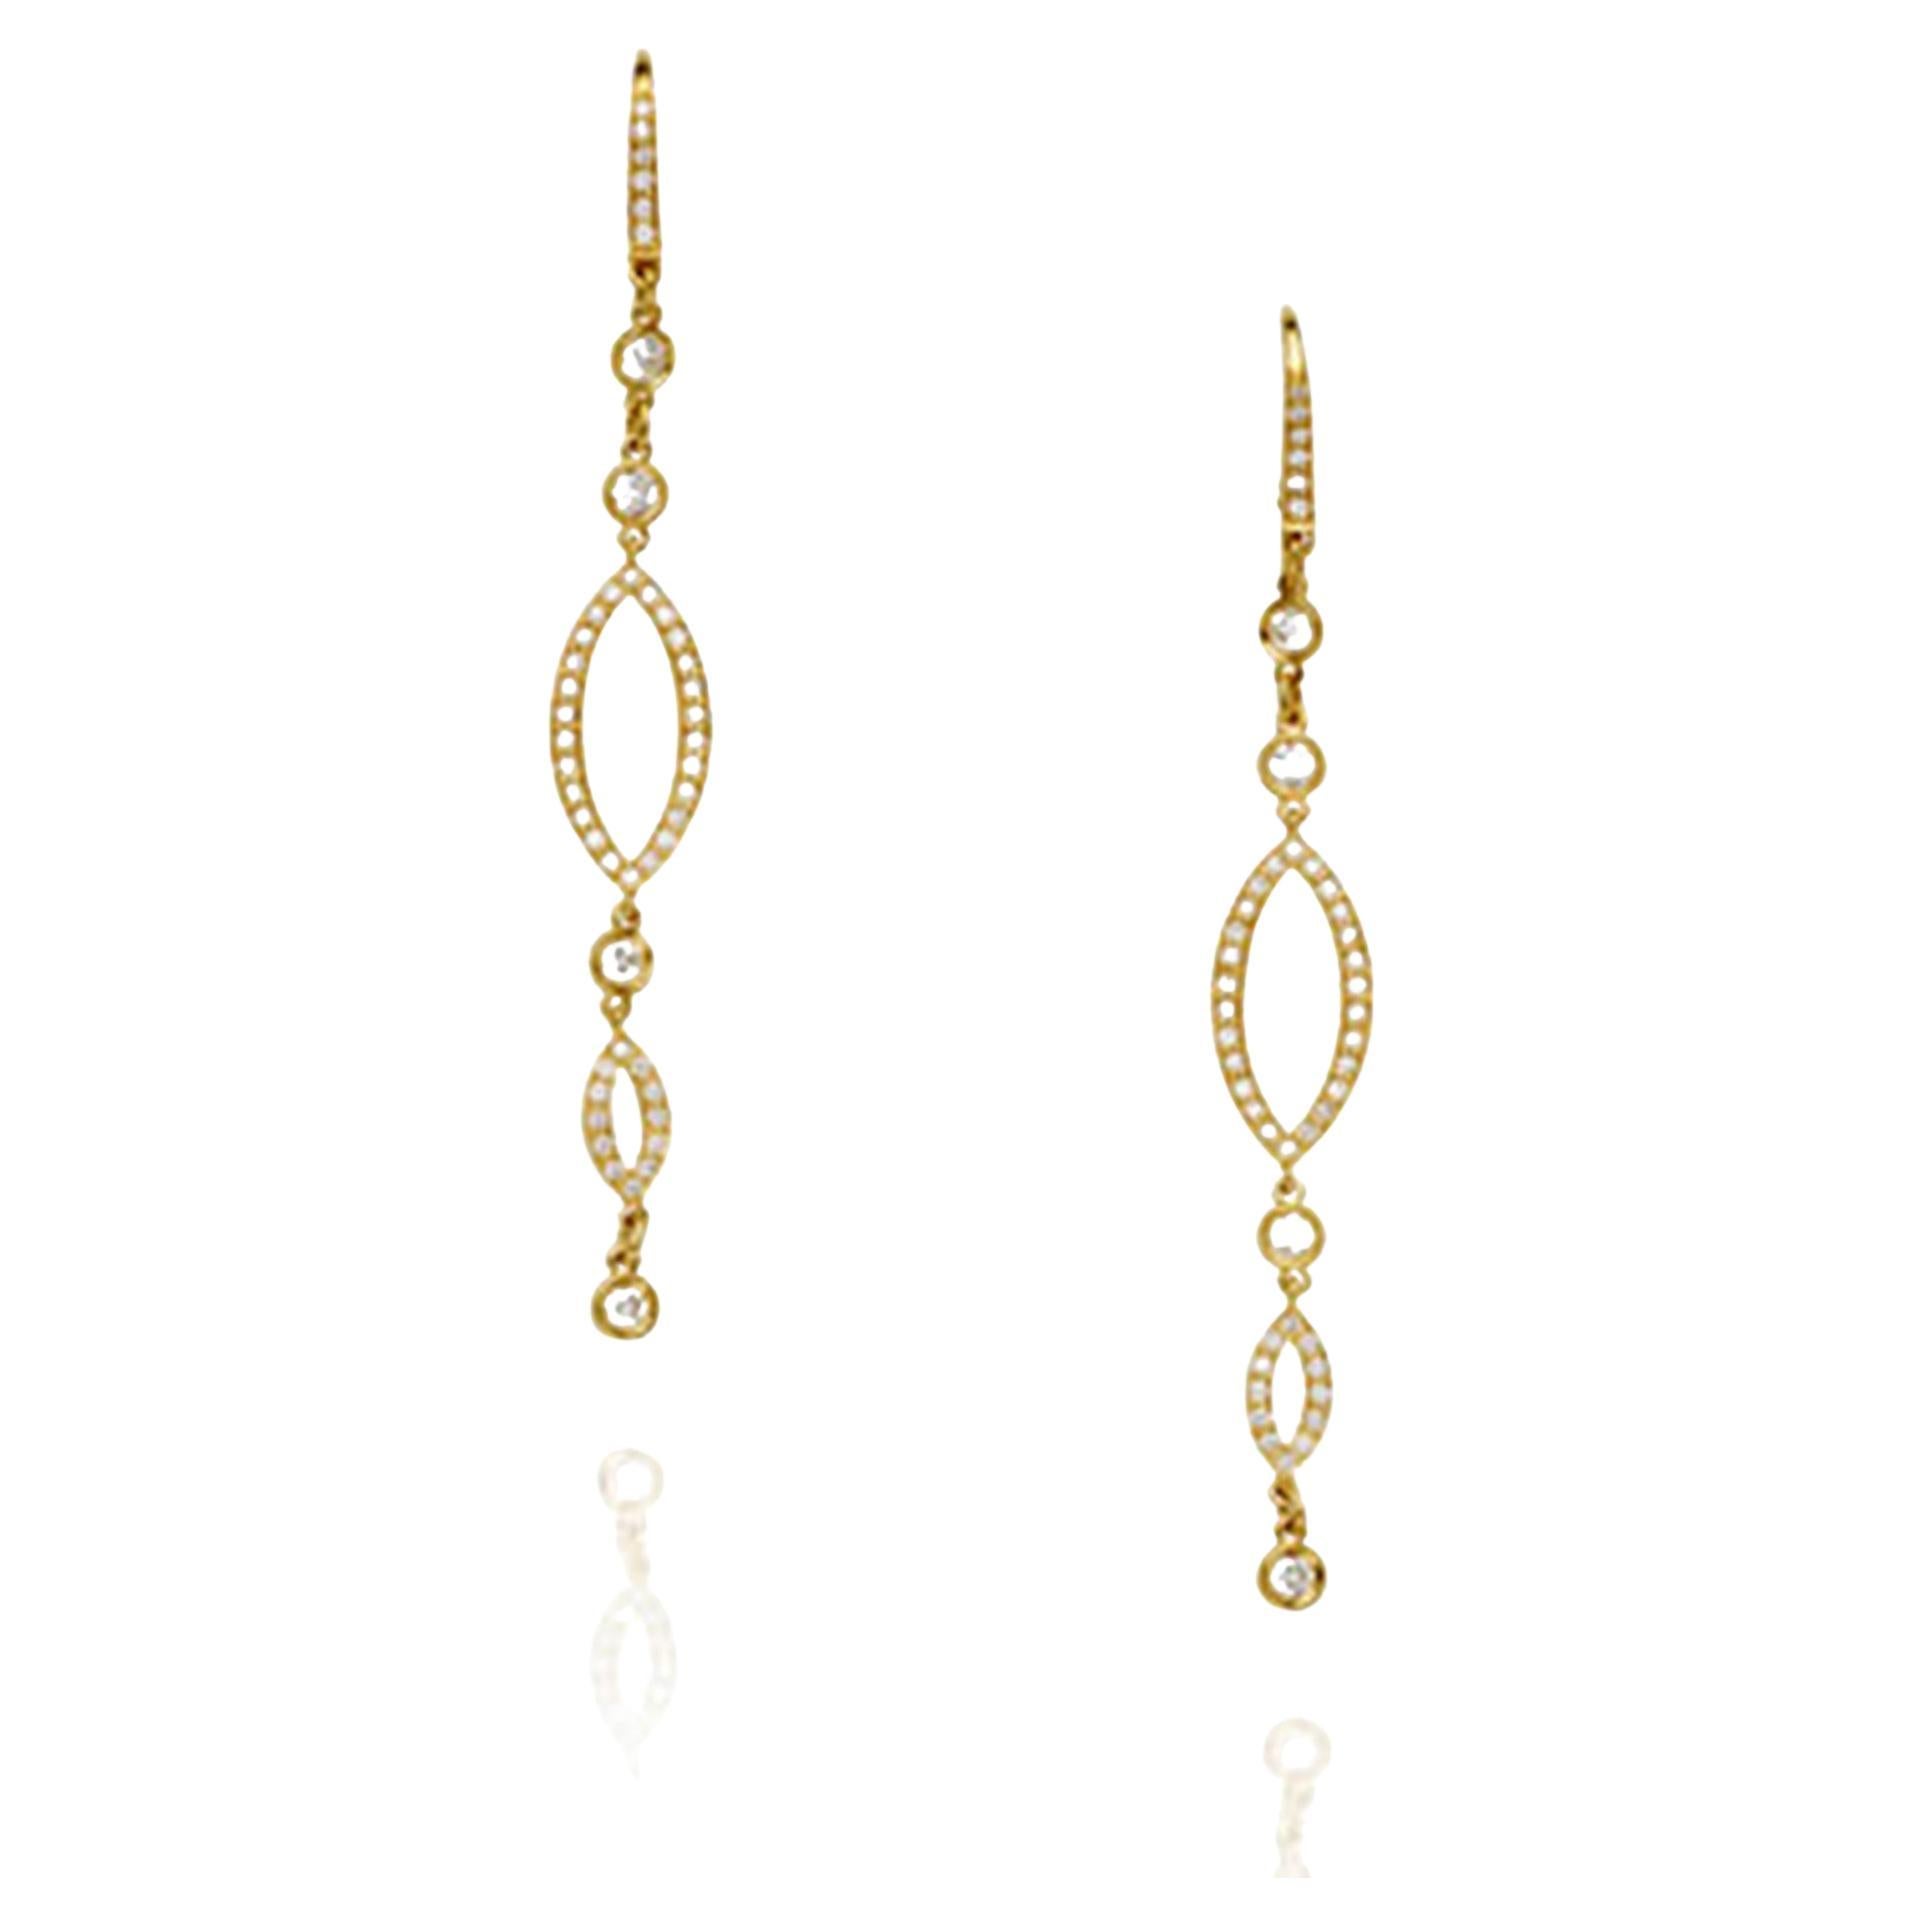 This is a beautiful pair of designer earrings set with 84 white diamonds in 18k yellow gold with an openwork dangle design.  The 8 larger diamonds measure .10 carats each with 88 additional diamonds total diamond weight of 2.0 carats.  The diamonds